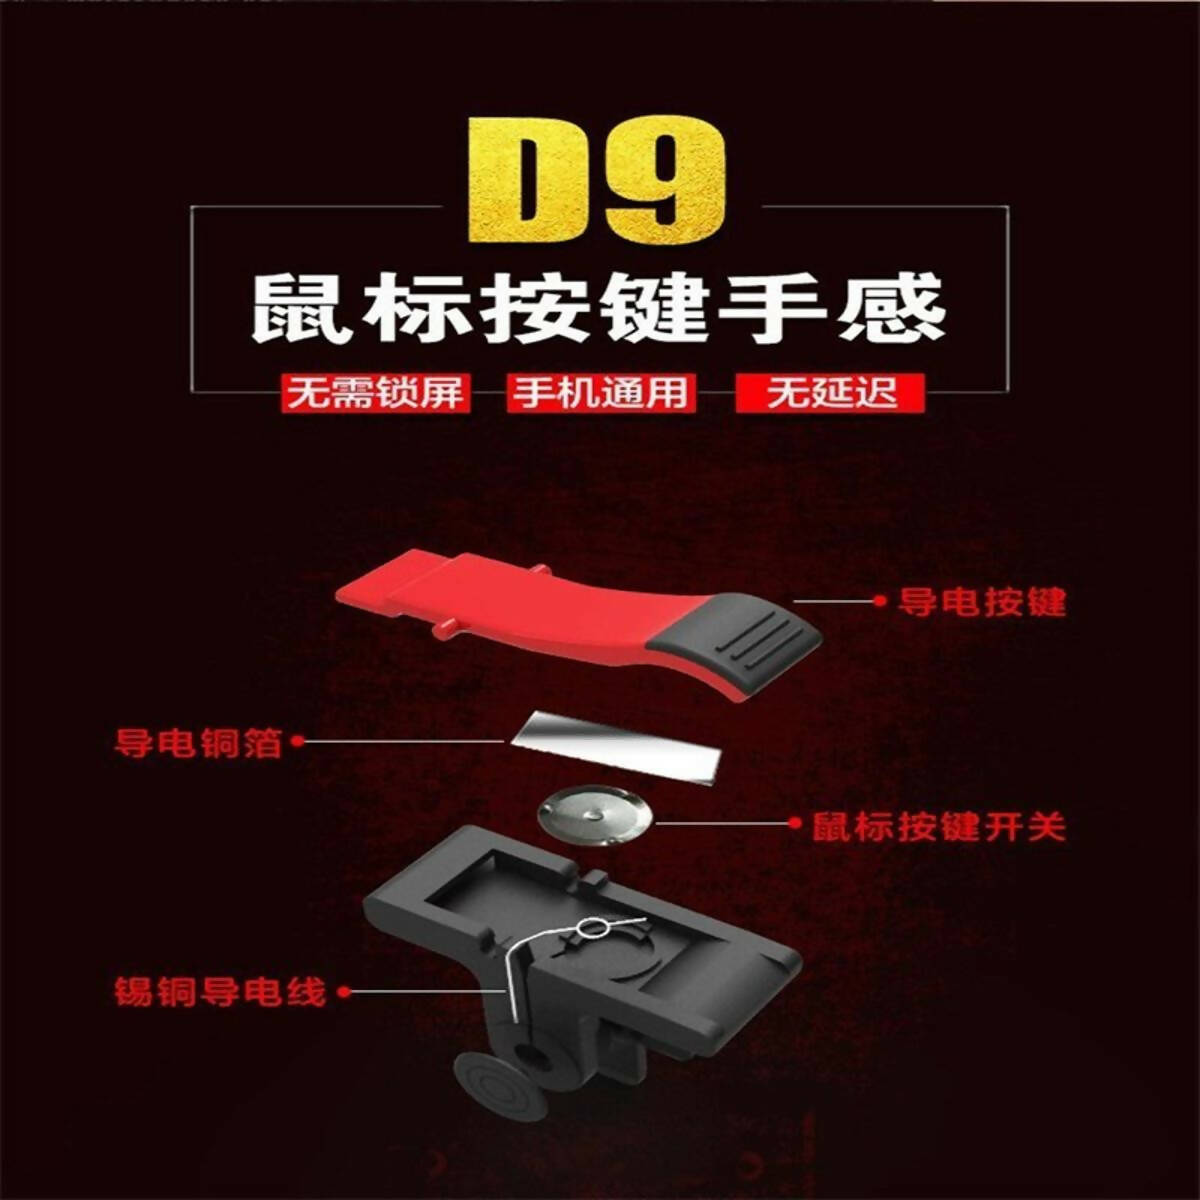 Mobile Gaming D9 Pubg Trigger Controller Fire/support Button L1 R1 Android And Ios - Red